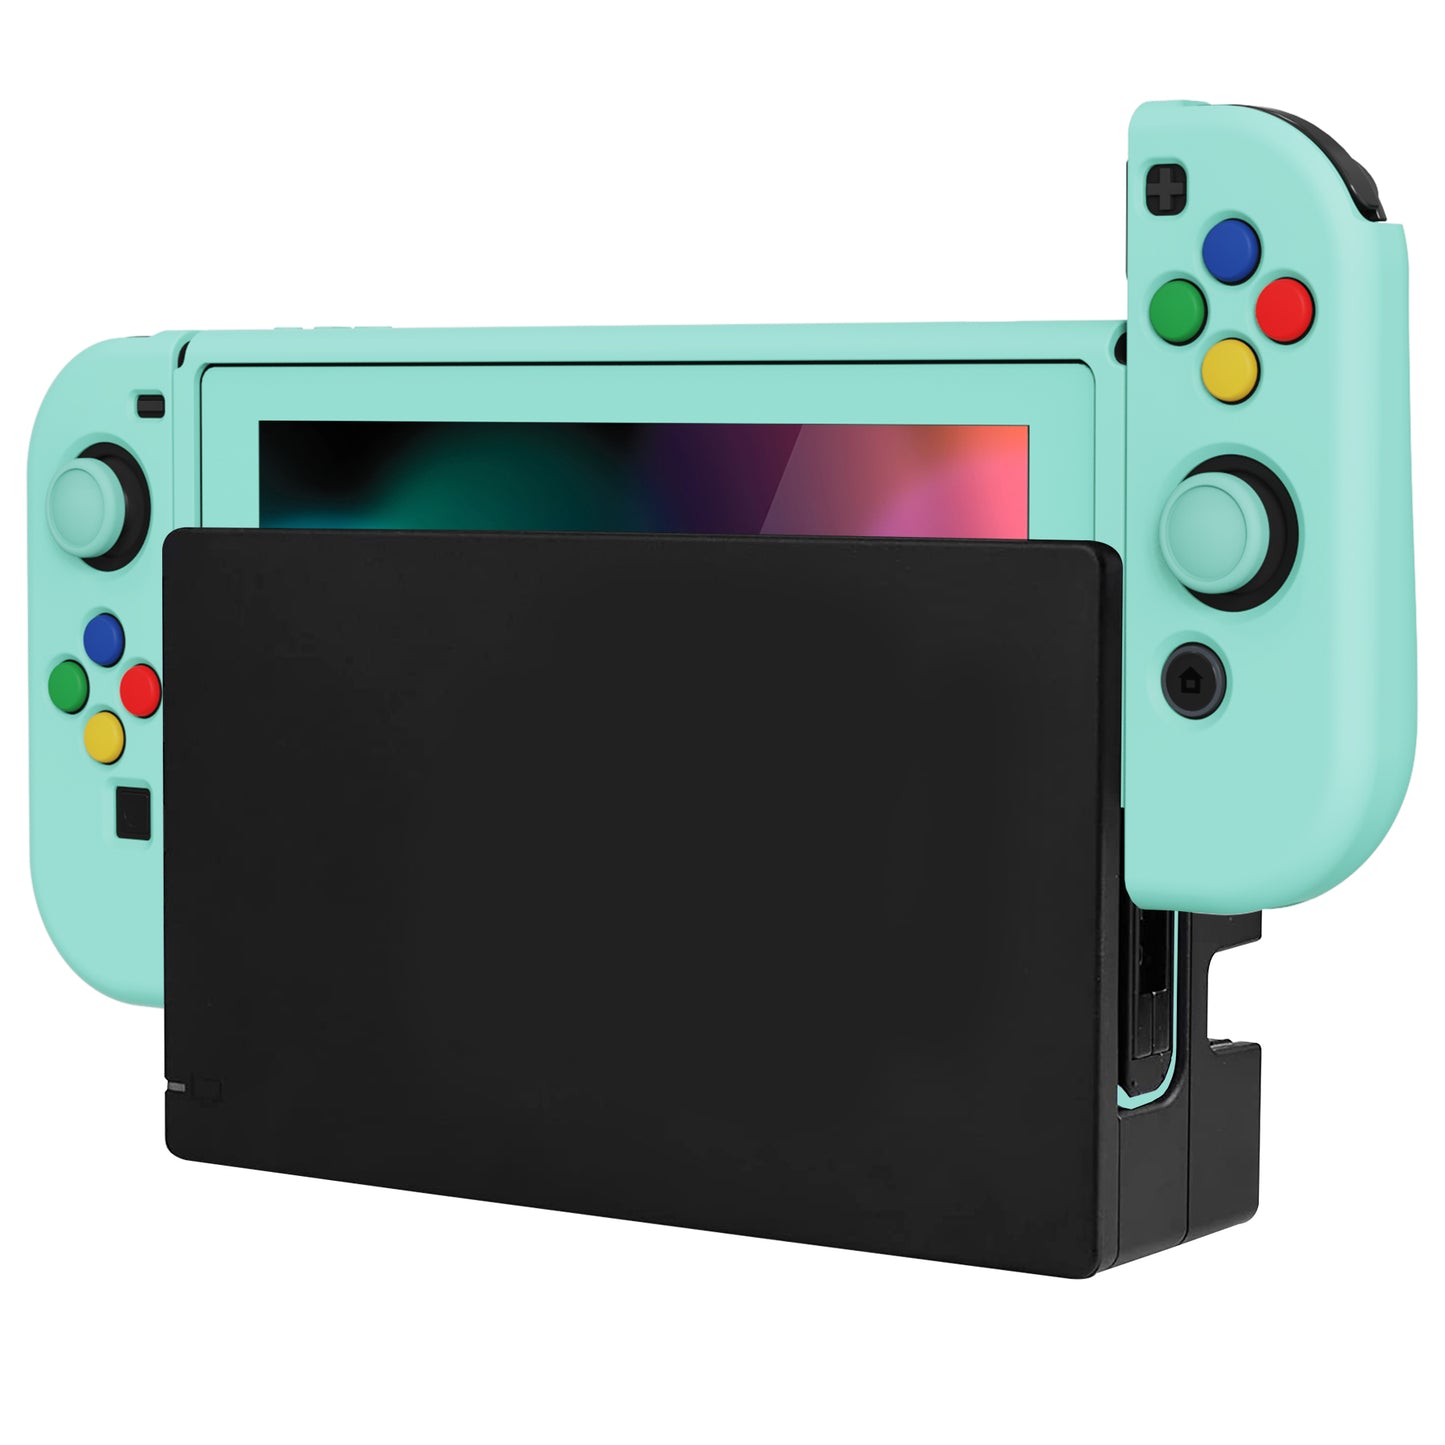 PlayVital ZealProtect Soft Protective Case for Nintendo Switch, Flexible Cover for Switch with Tempered Glass Screen Protector & Thumb Grips & ABXY Direction Button Caps - Misty Green - RNSYM5004 playvital